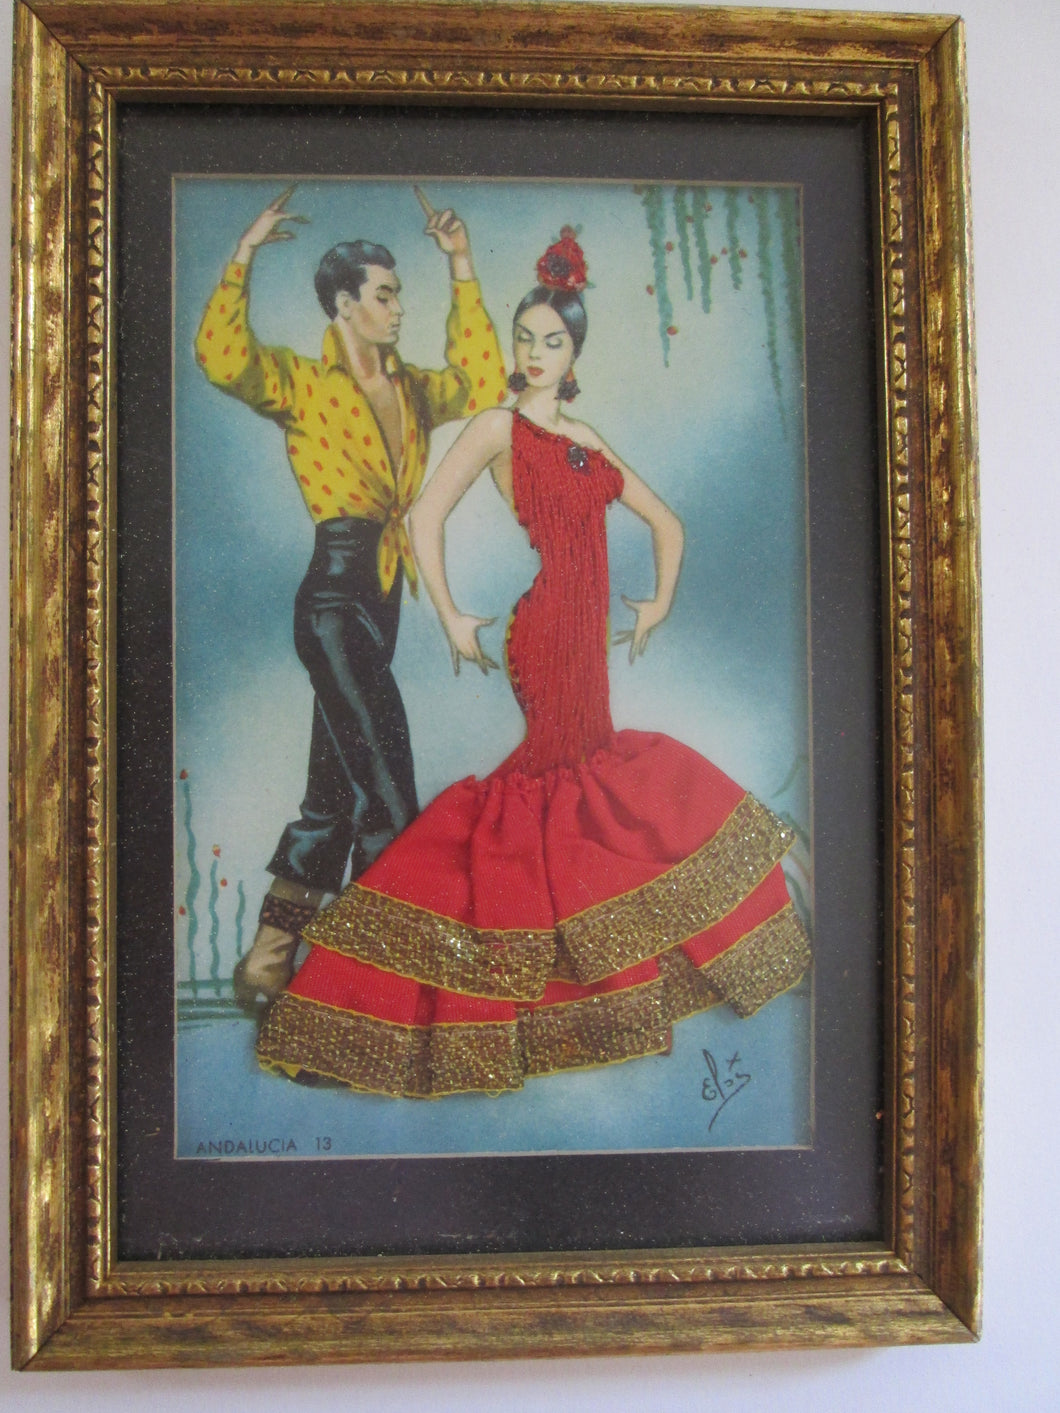 Elon Andalucia 13 Framed & Signed with fabric dress